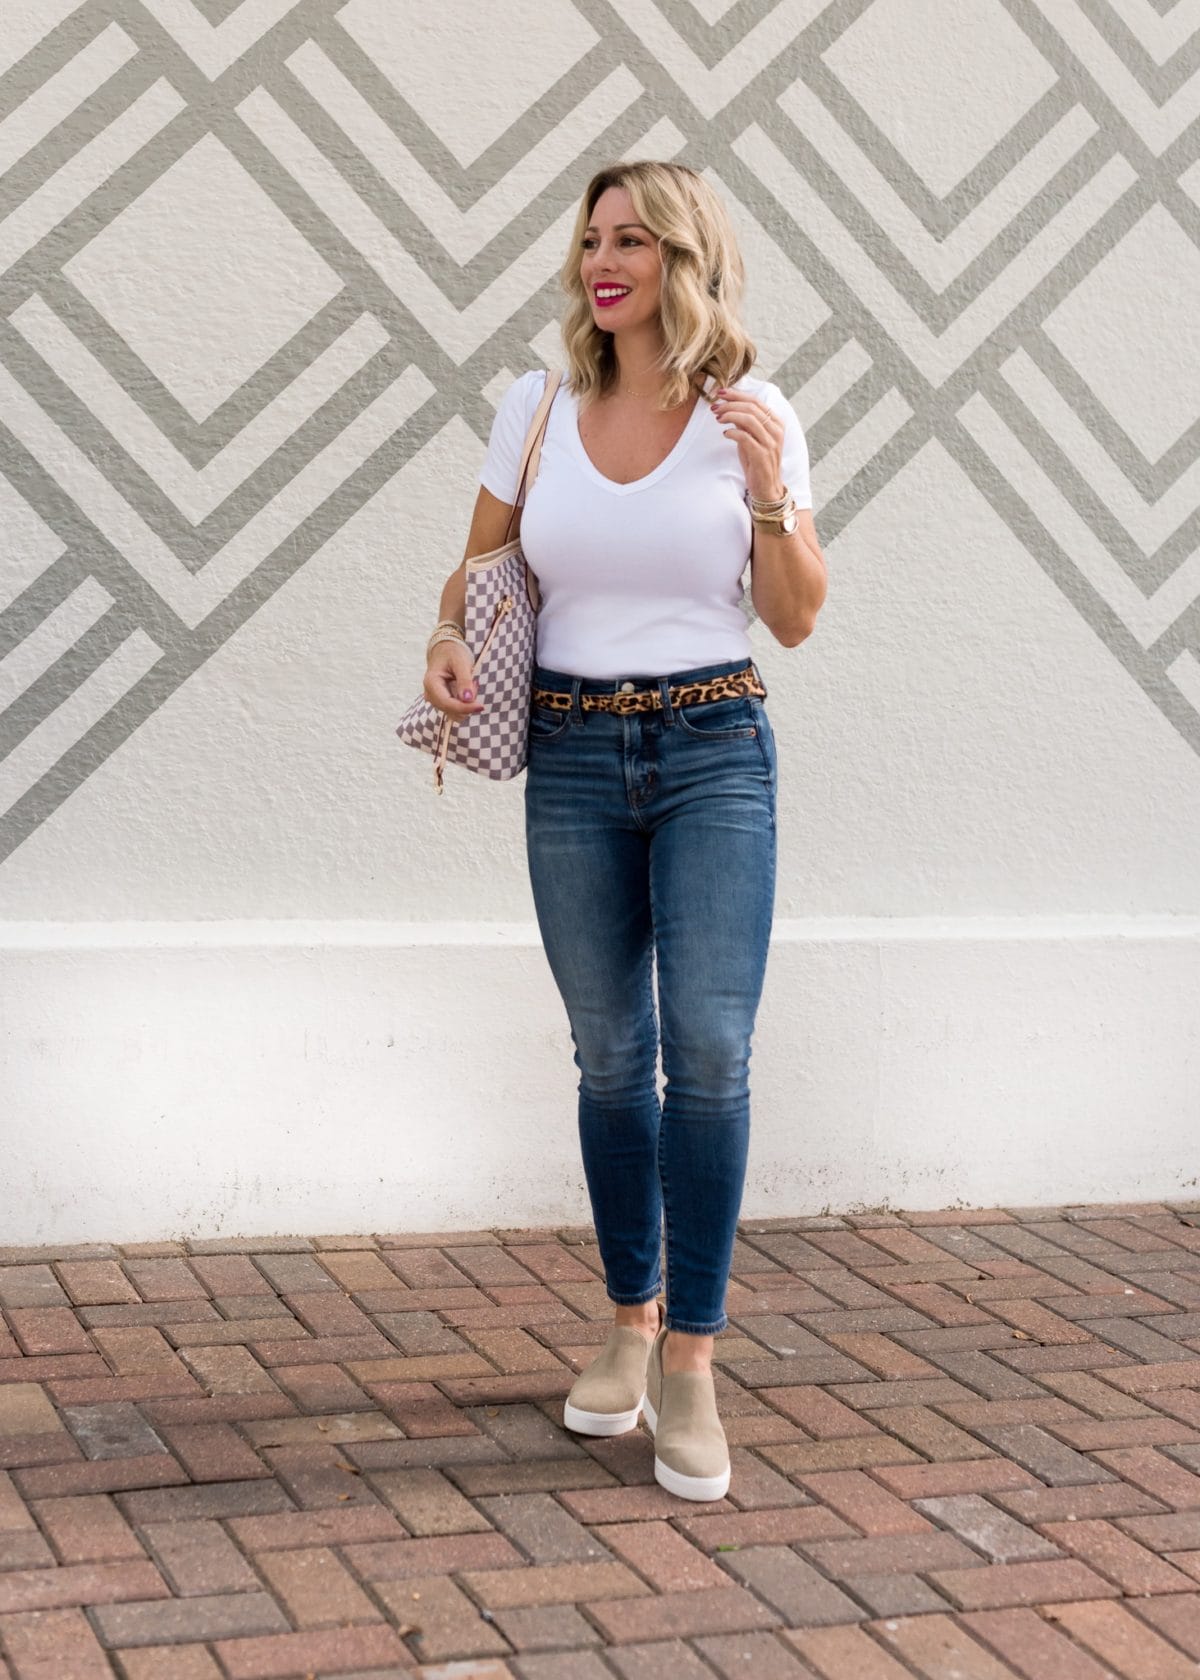 Perfect white t-shirt and jeans with sneakers